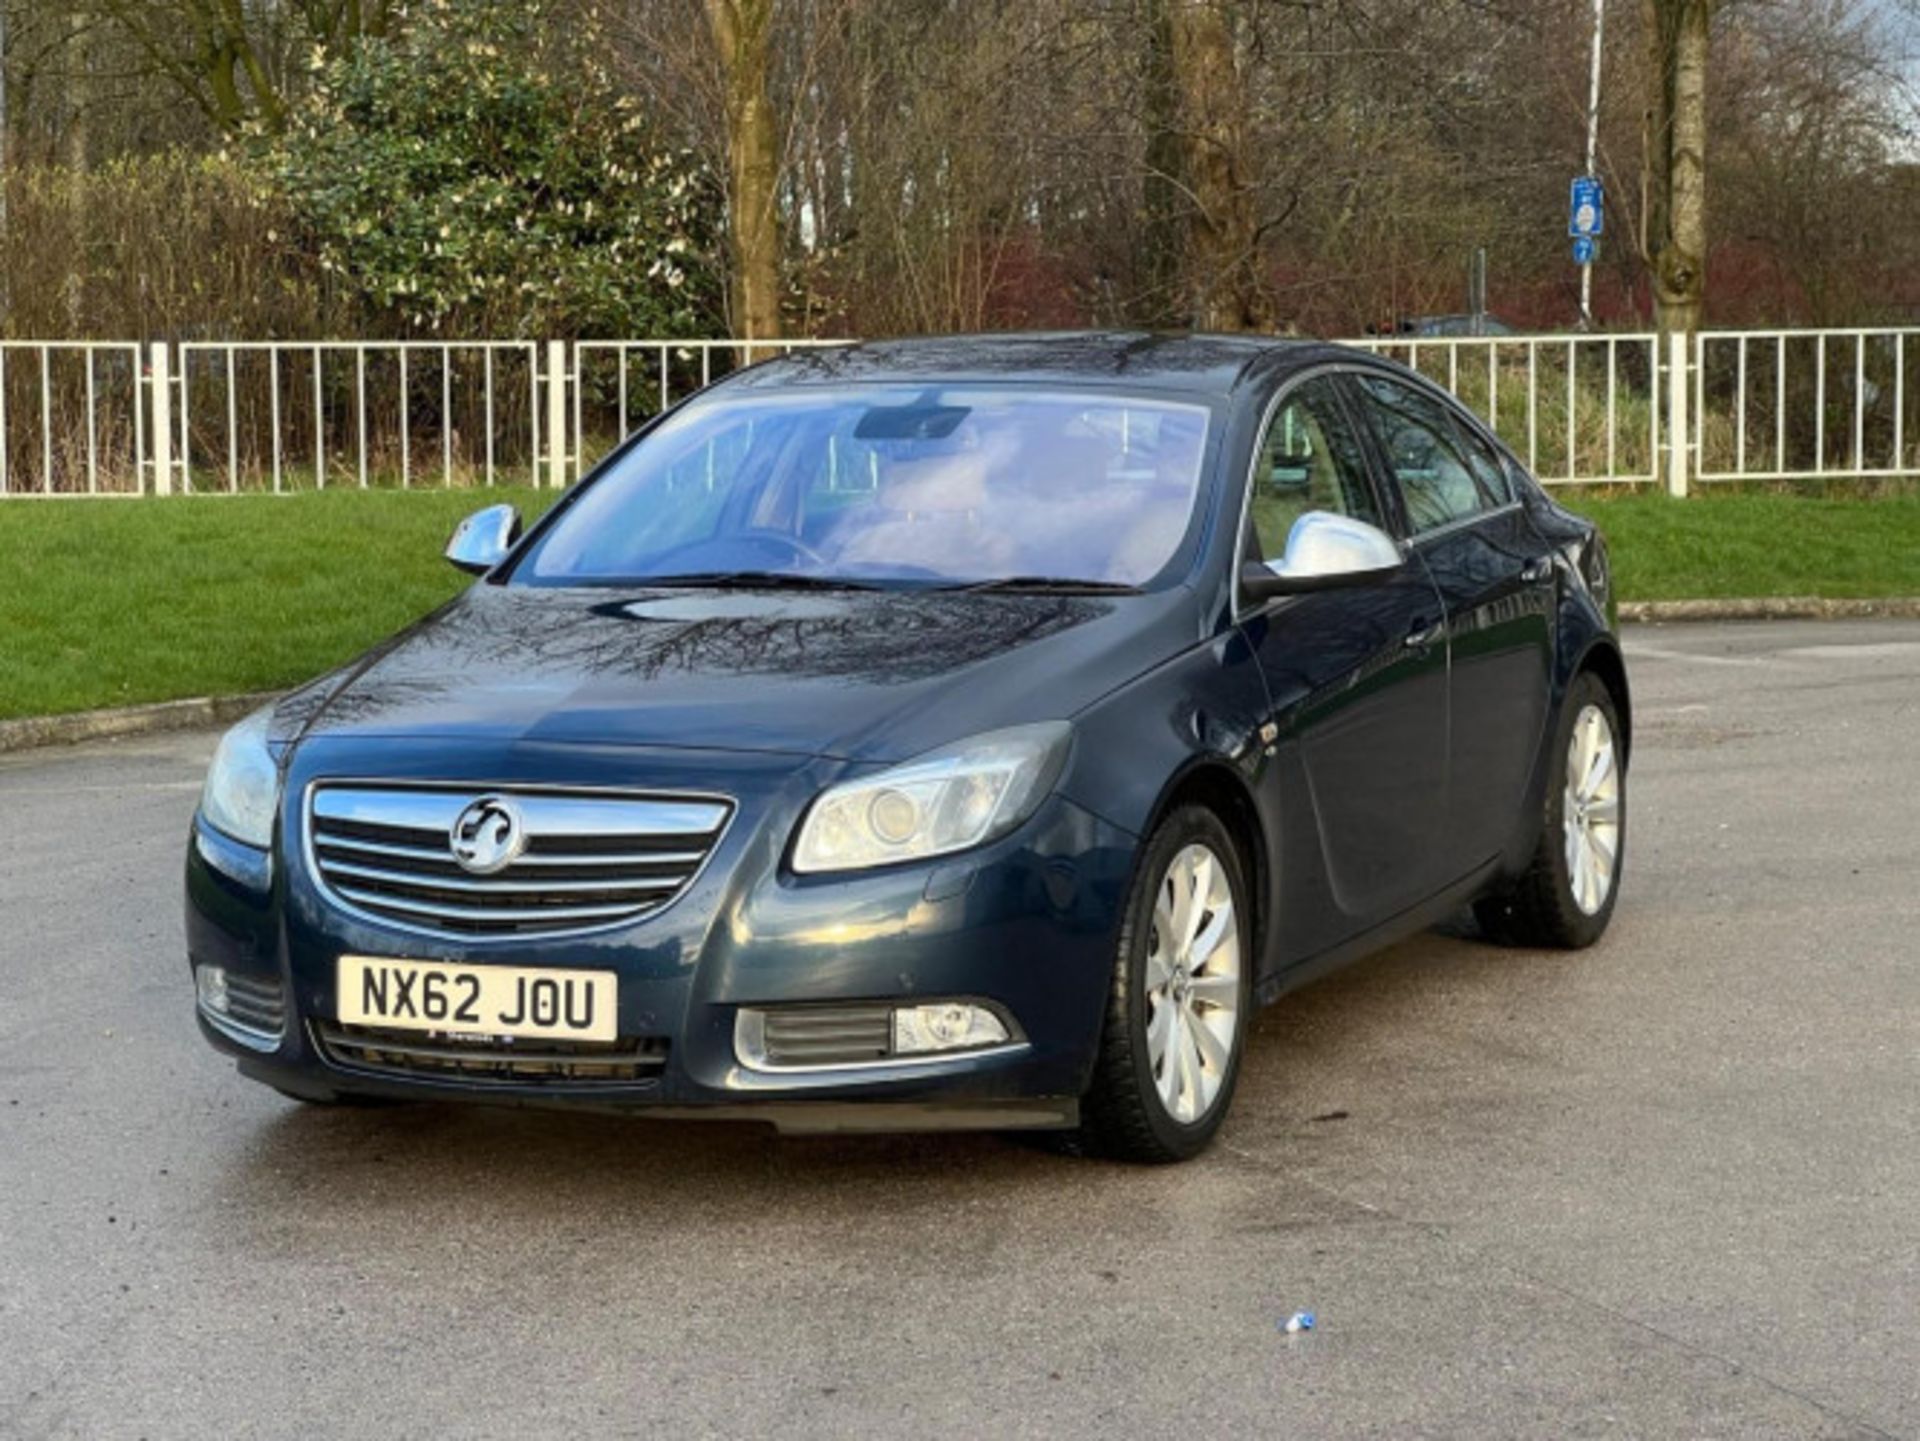 2012 VAUXHALL INSIGNIA 2.0 CDTI ELITE AUTO EURO 5 - DISCOVER EXCELLENCE >>--NO VAT ON HAMMER--<< - Image 74 of 79